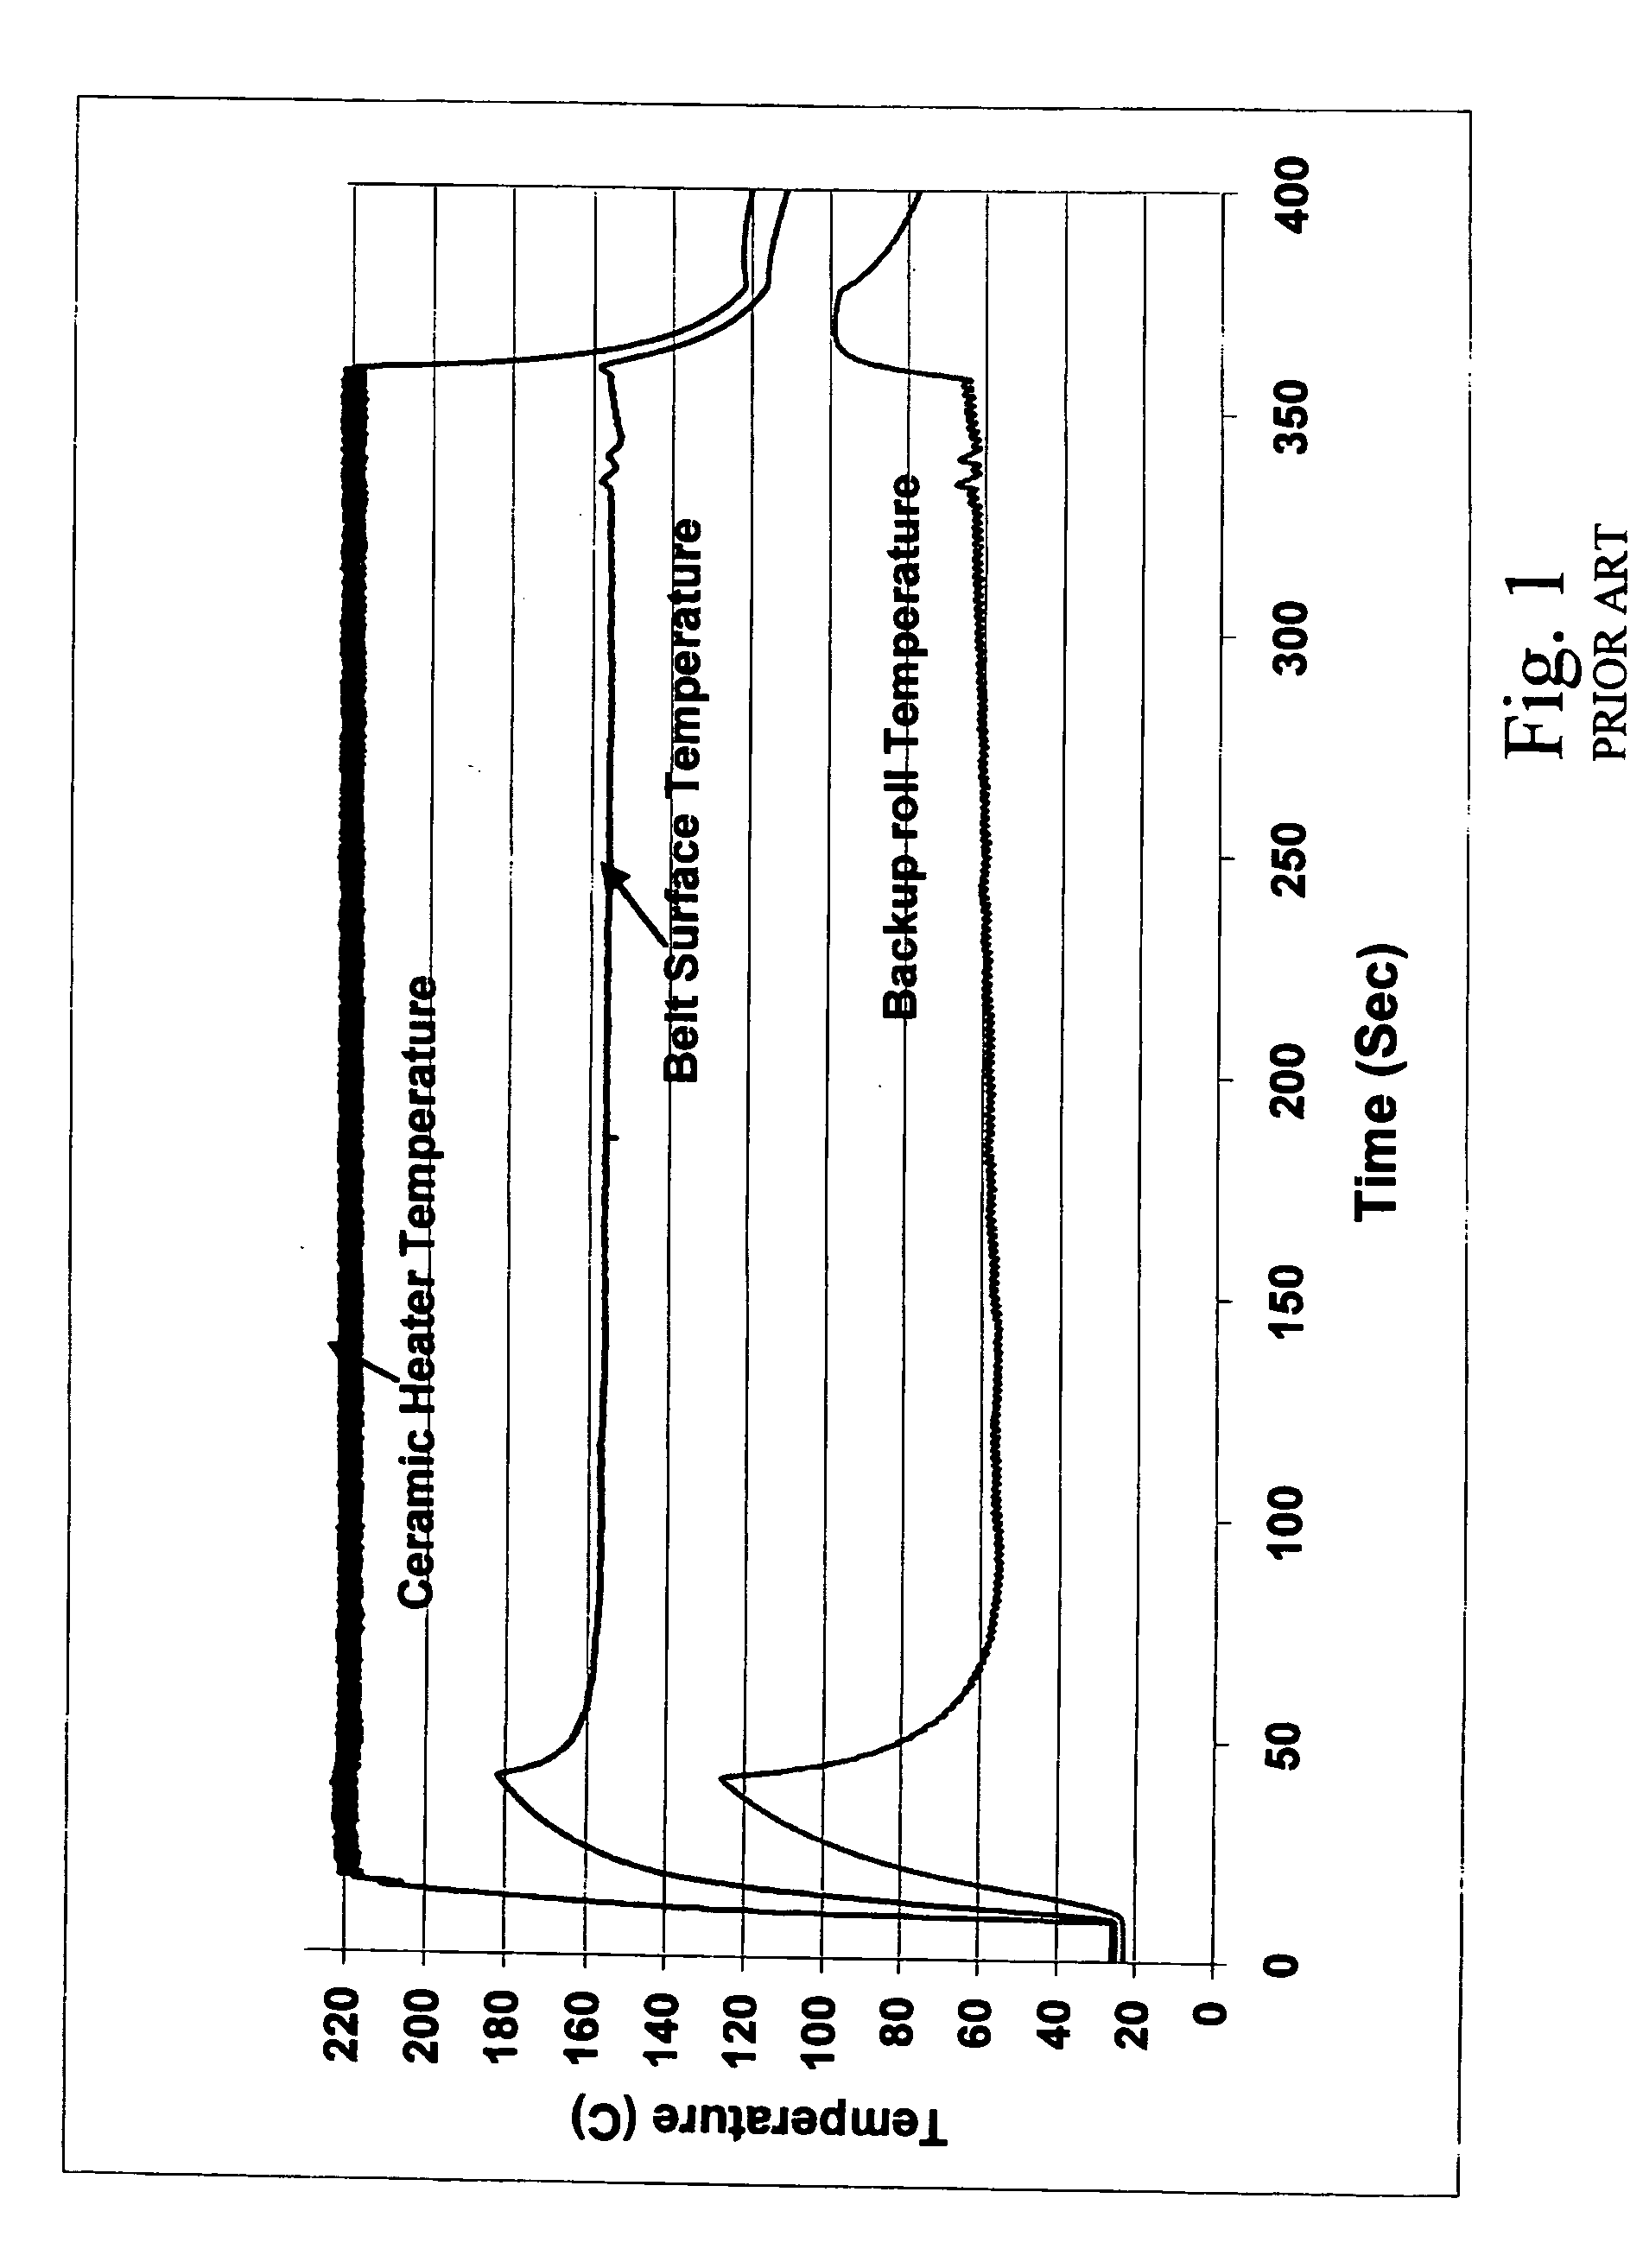 Belt fuser assembly with heated backup roll in an electrophotographic imaging device